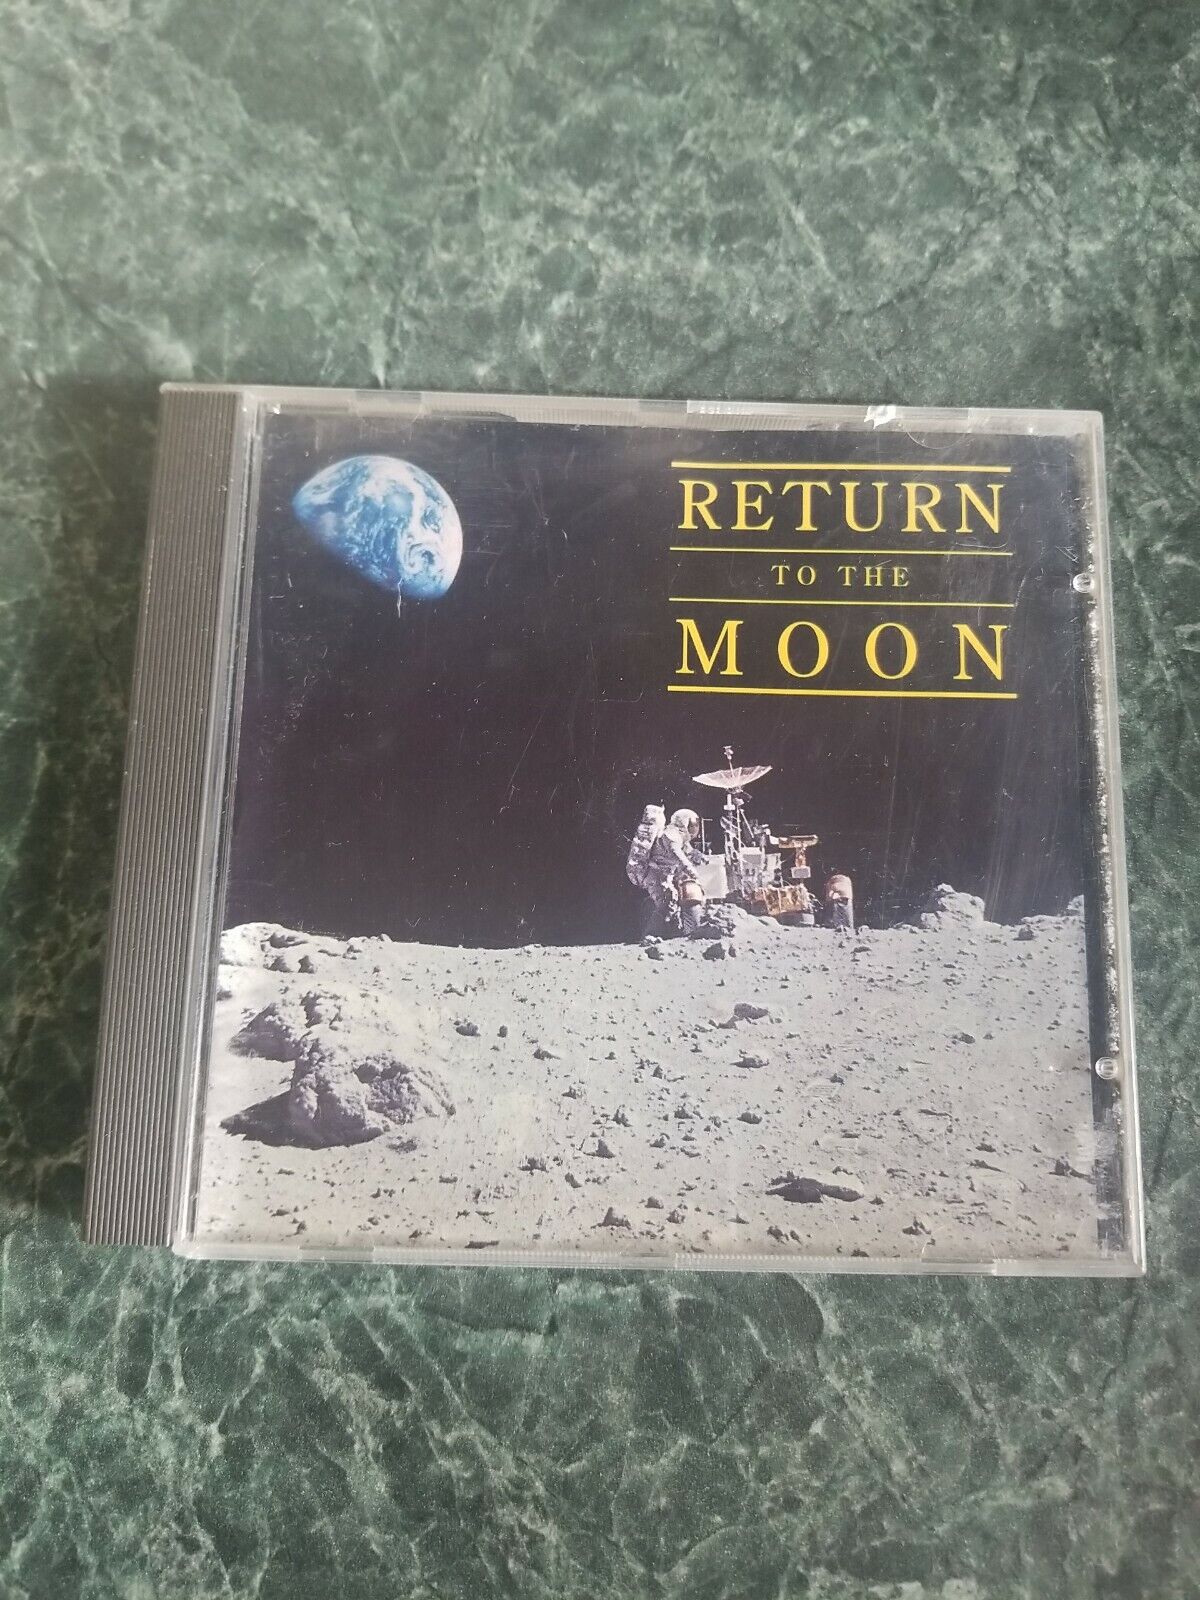 Return To The Moon Lunar Eclipse Software Cd Rom 1993 Rare Vintage